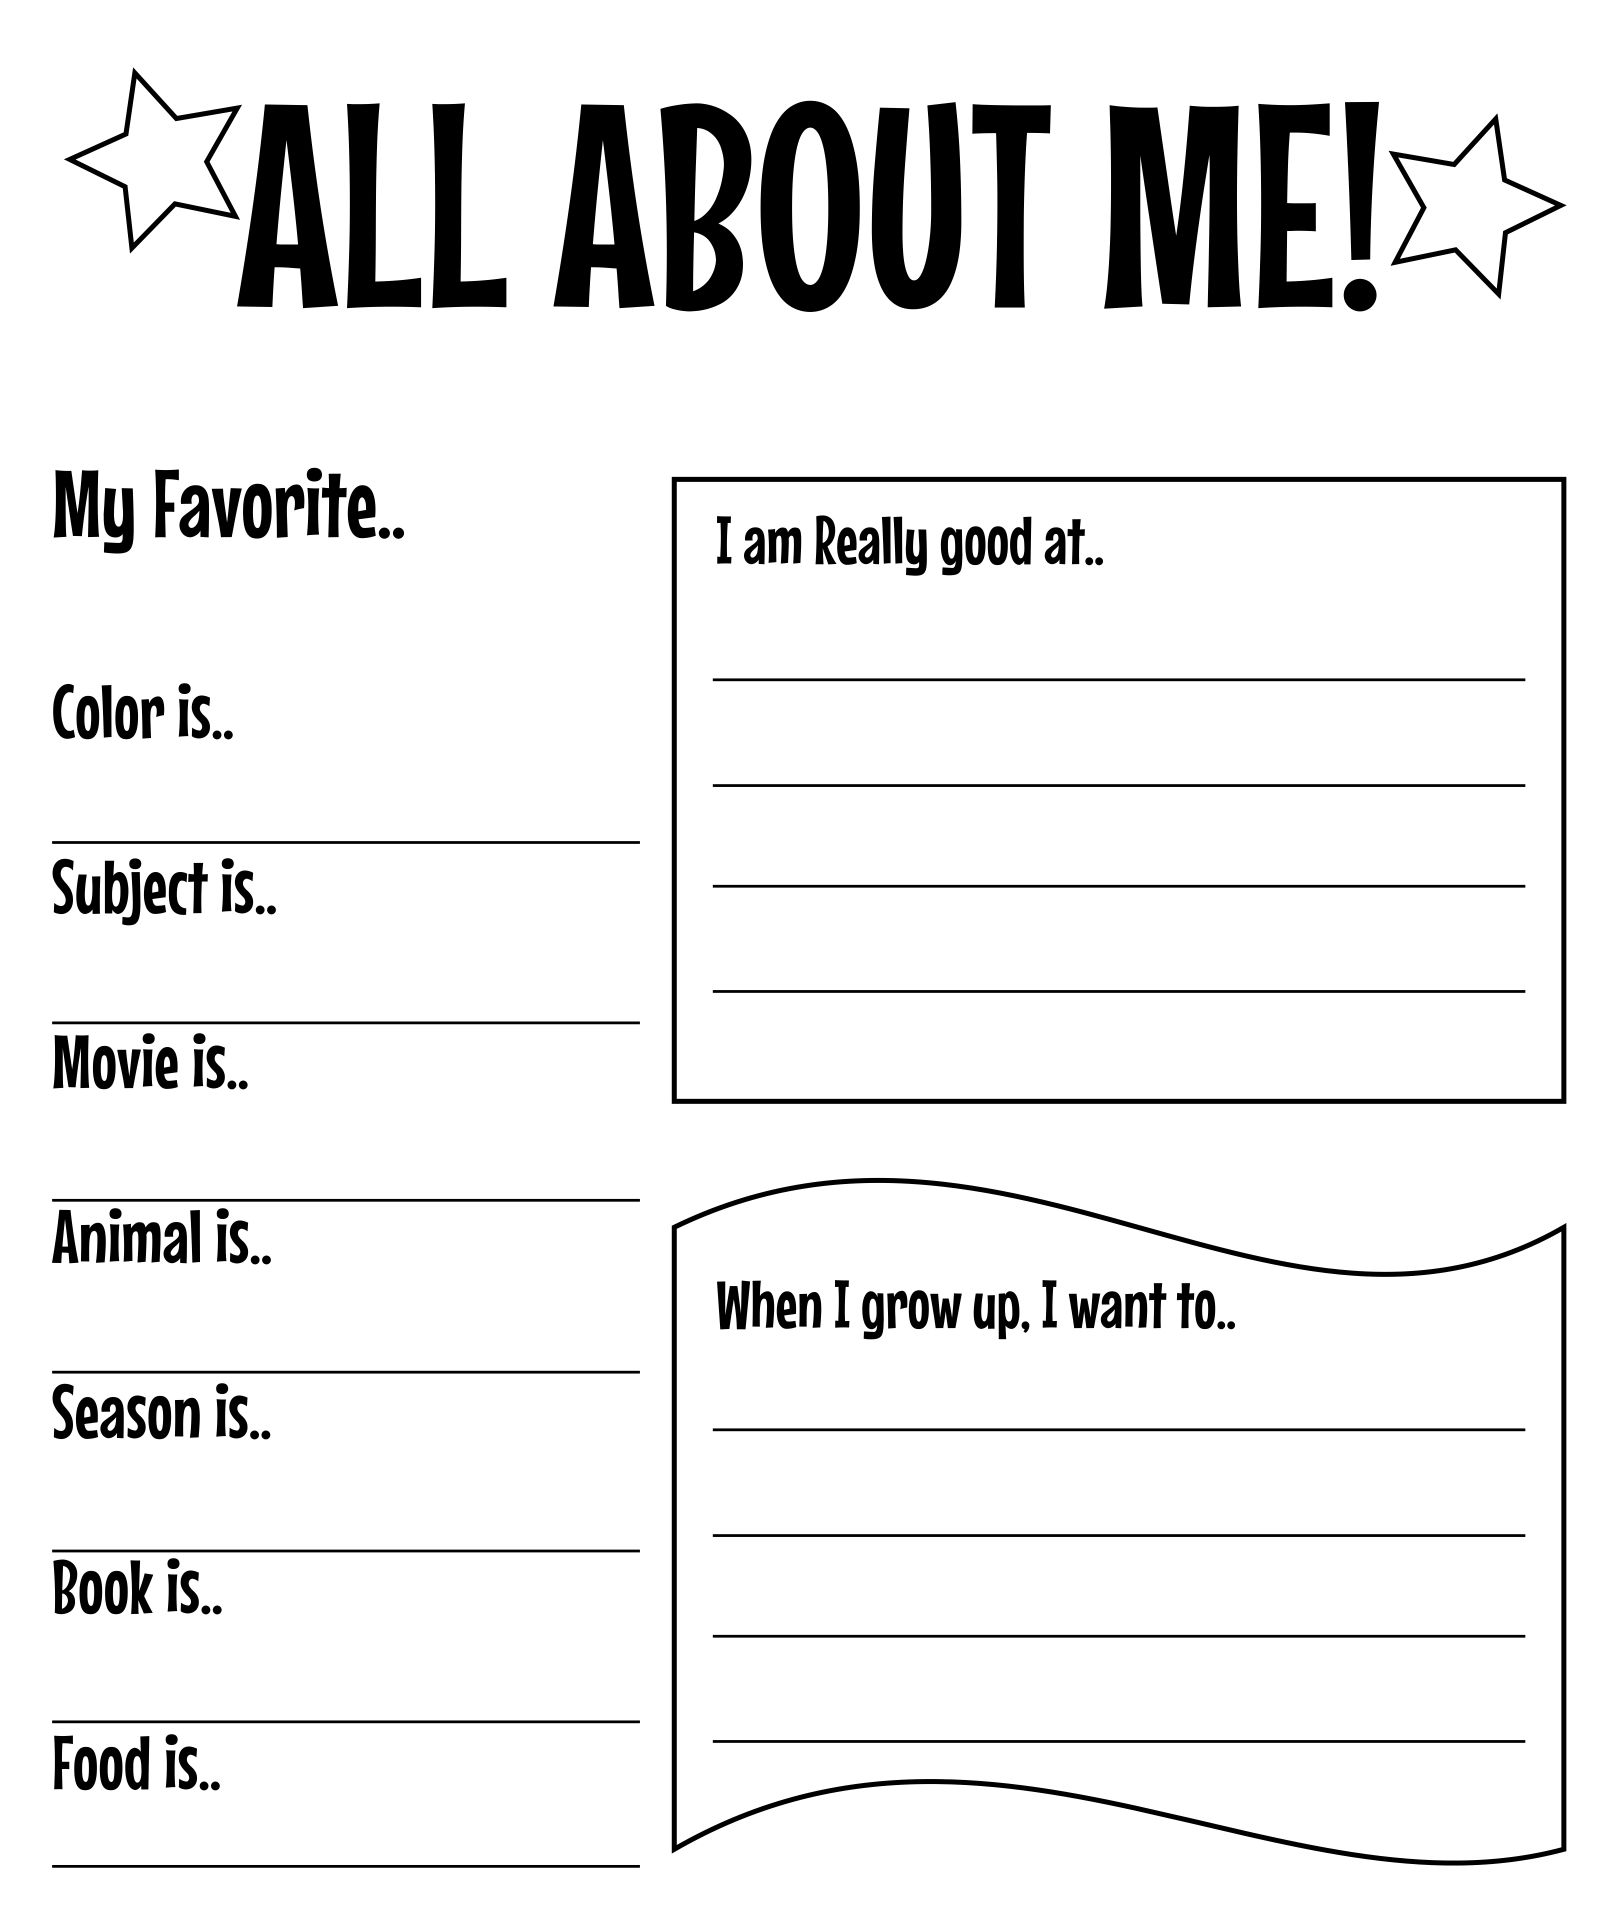 all-about-me-book-printable-all-about-me-printable-book-templates